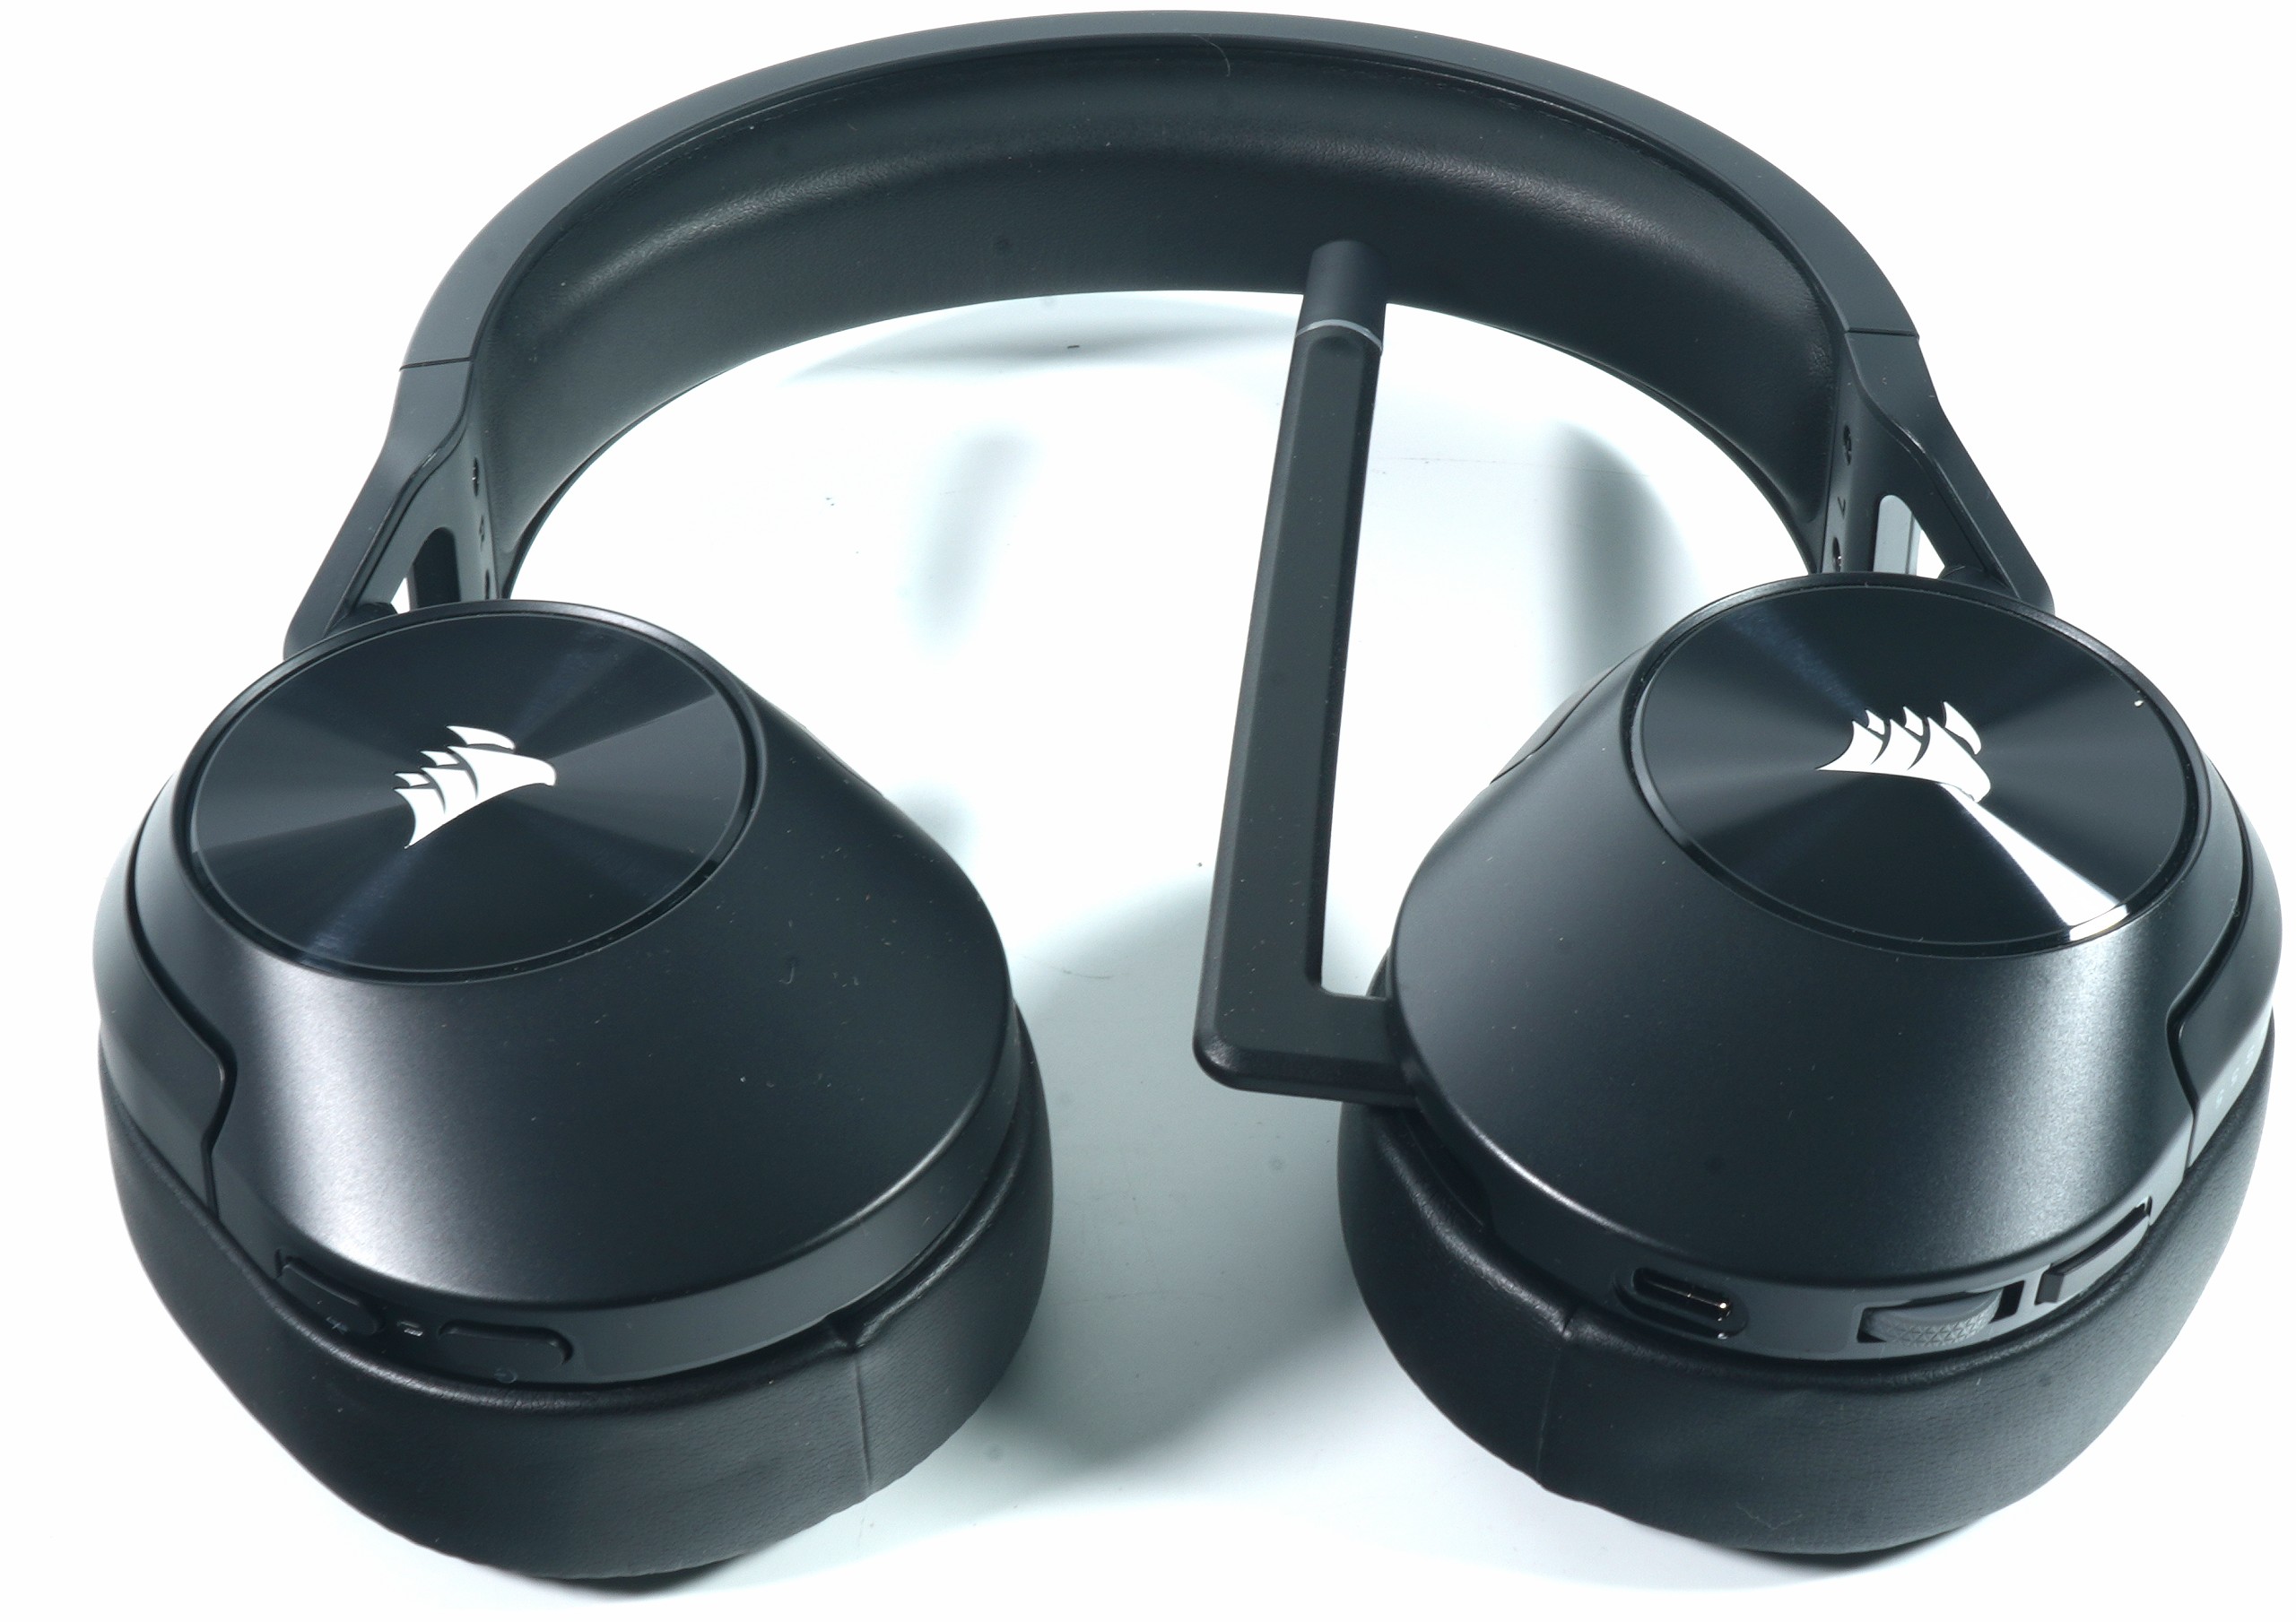 HS55 WIRELESS CORE Gaming Headset